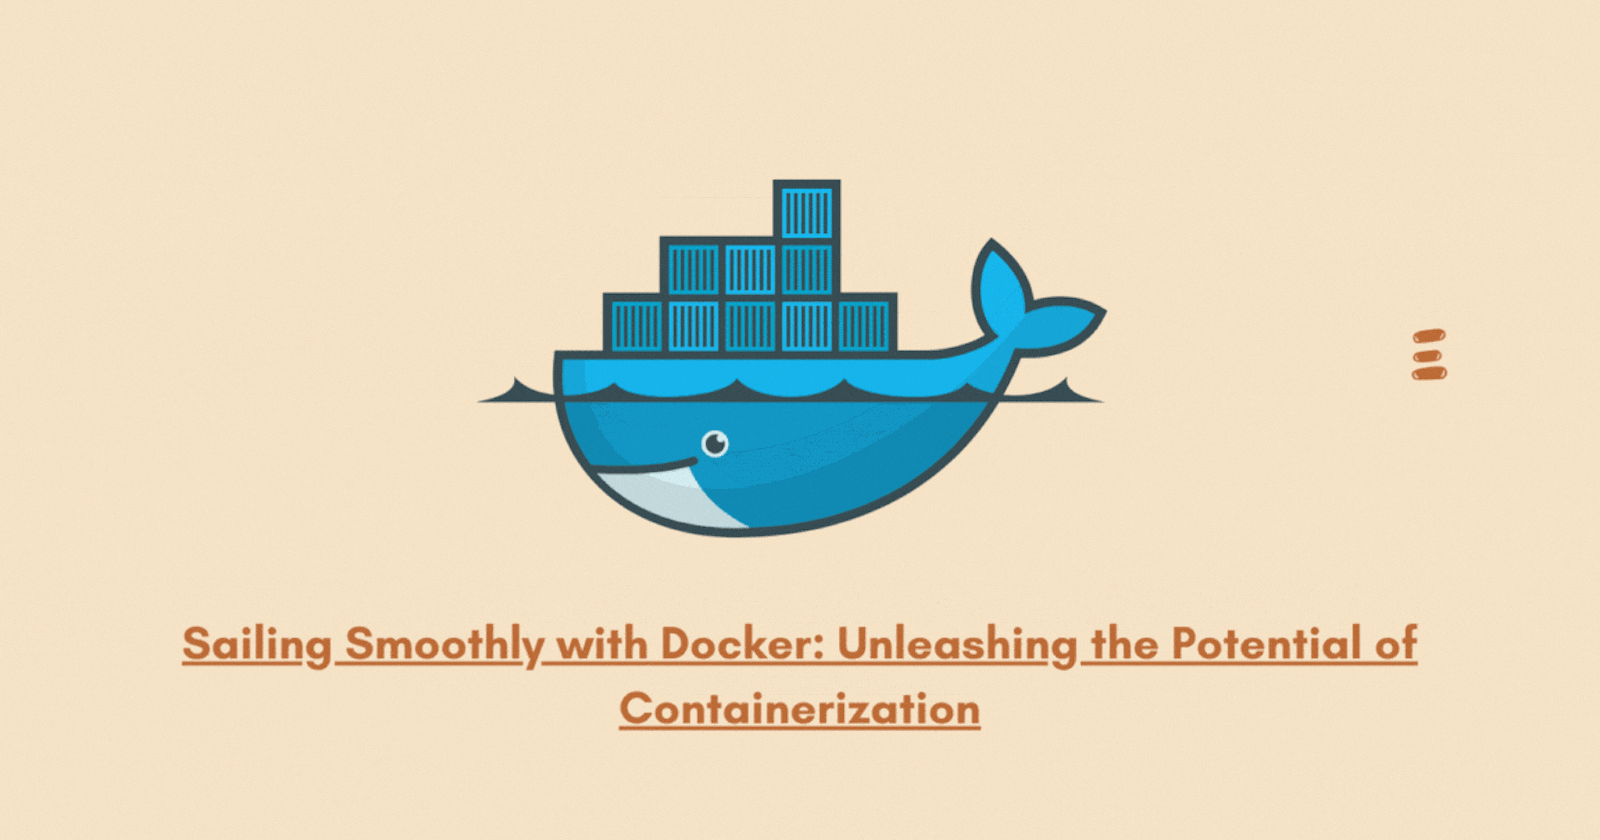 Sailing Smoothly with Docker: Unleashing the Potential of Containerization